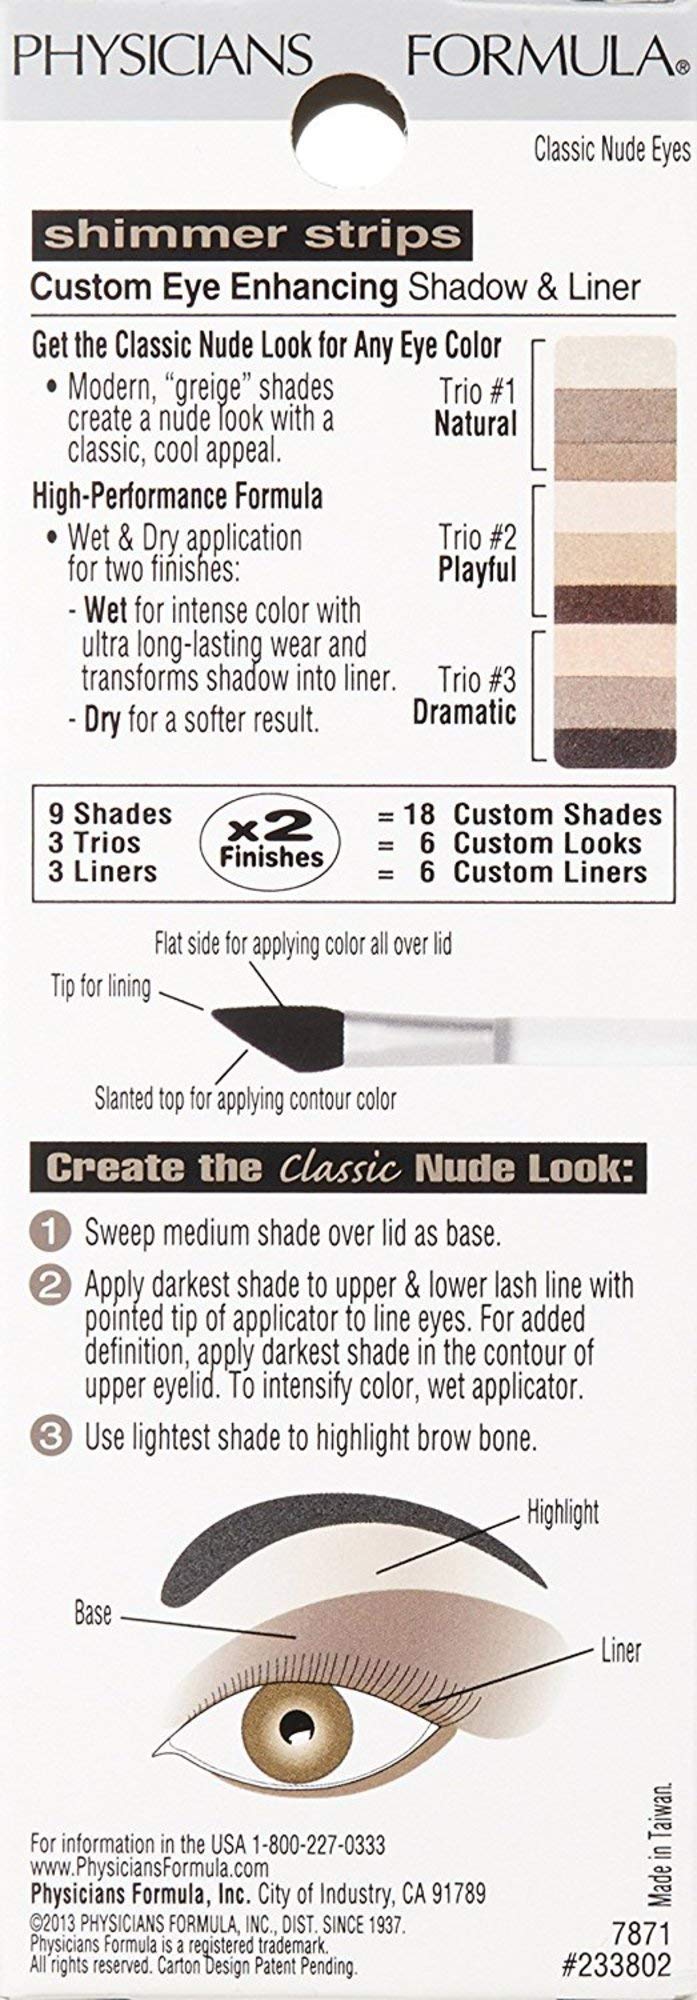 [Australia] - Physicians Formula Shimmer Strips Custom Eye Enhancing Shadow & Liner, Nude Collection, Classic Nude Eyes, 0.26 Ounce 